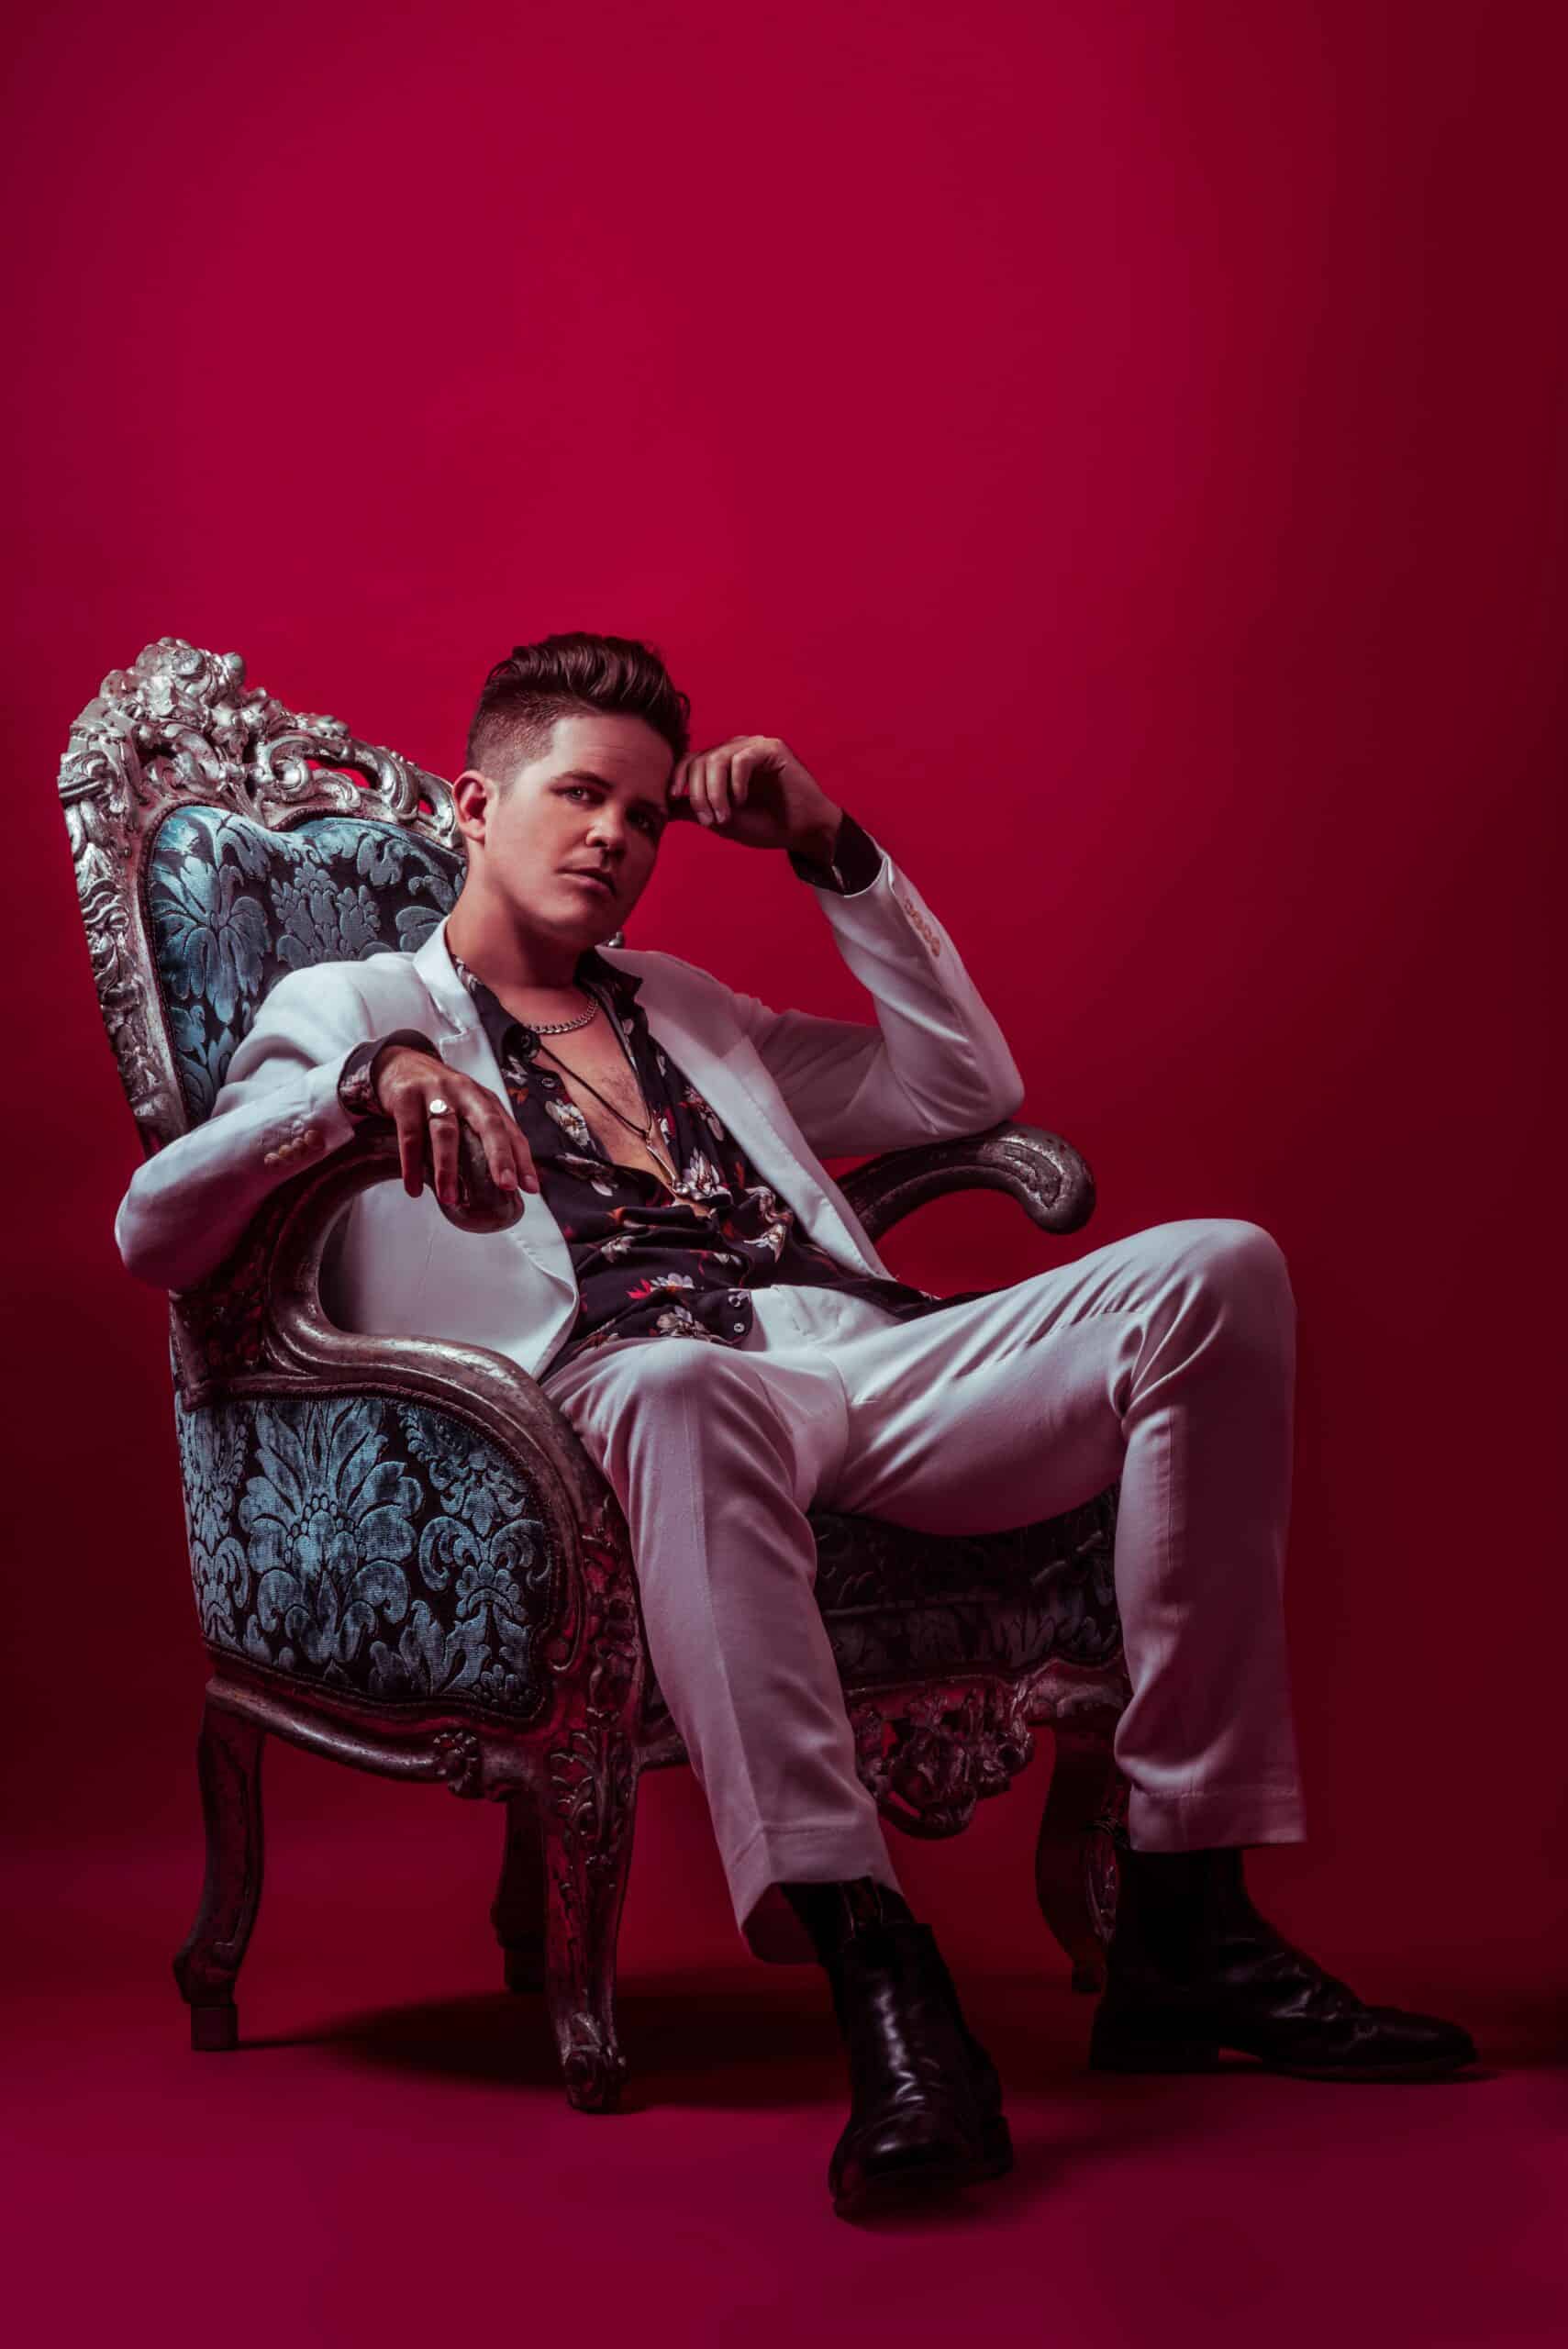 Photo of Luke Wright sitting on a chair in a red background